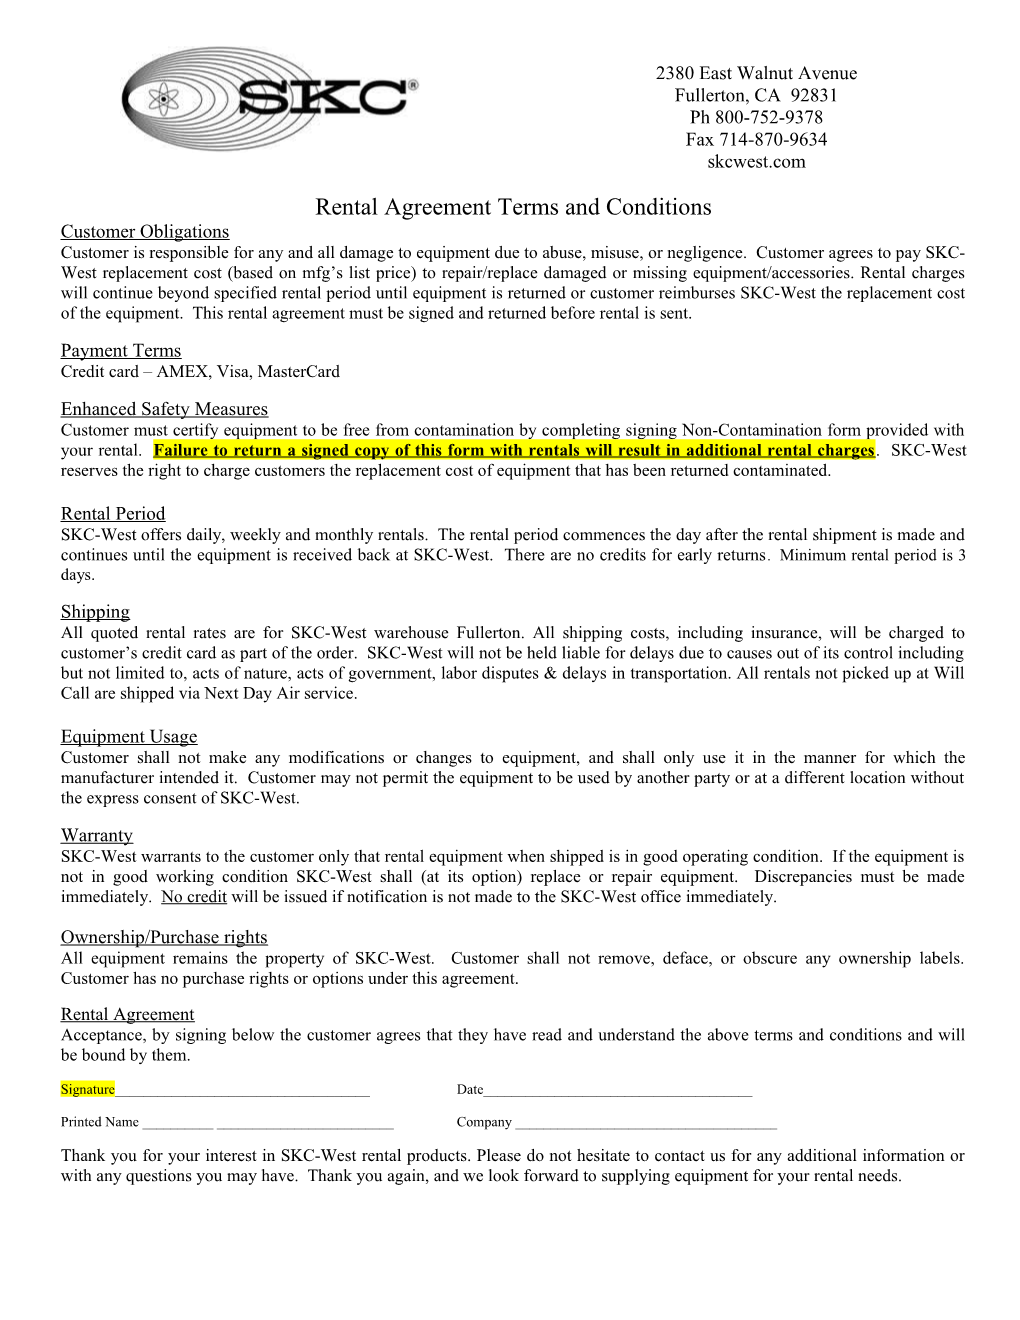 Rental Agreement Terms and Conditions